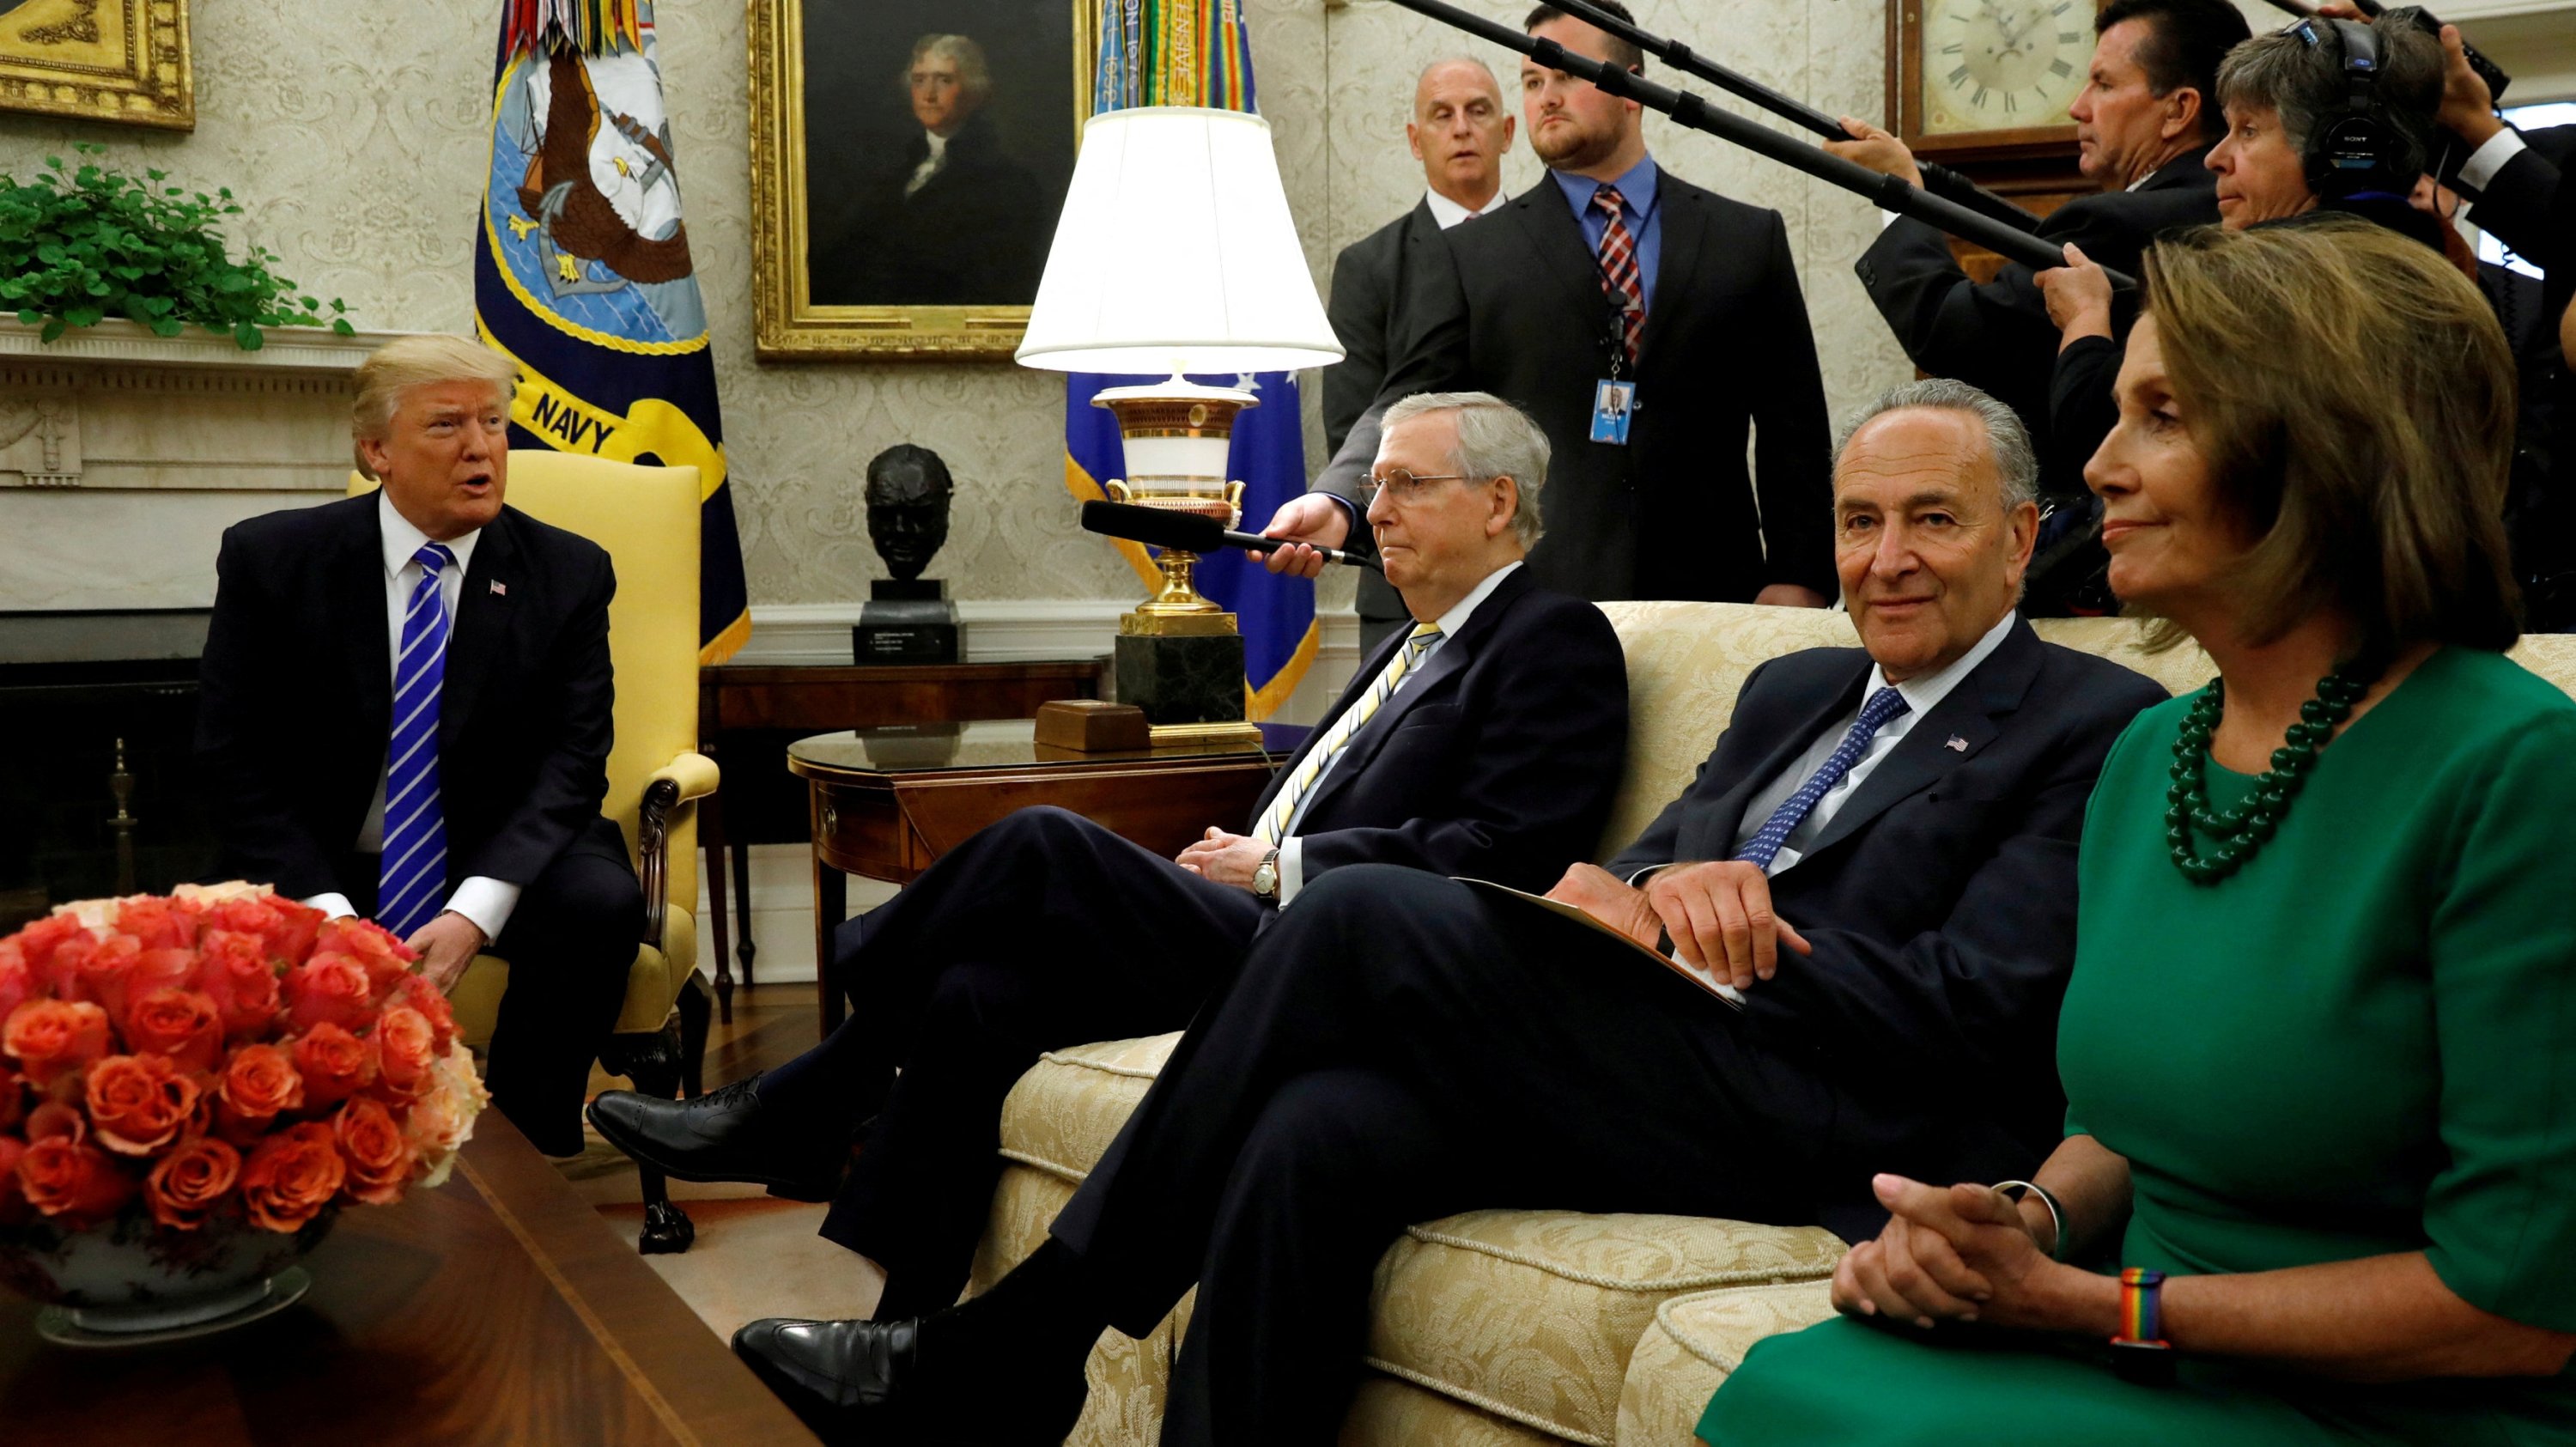 U.S. President Donald Trump meets with Senate Majority Leader Mitch McConnell (2nd L), Senate Democratic Leader Chuck Schumer (2nd R), House Minority Leader Nancy Pelosi (R) and other congressional leaders in the Oval Office of the White House in Washington, U.S., Sept. 6, 2017. (Reuters Photo)